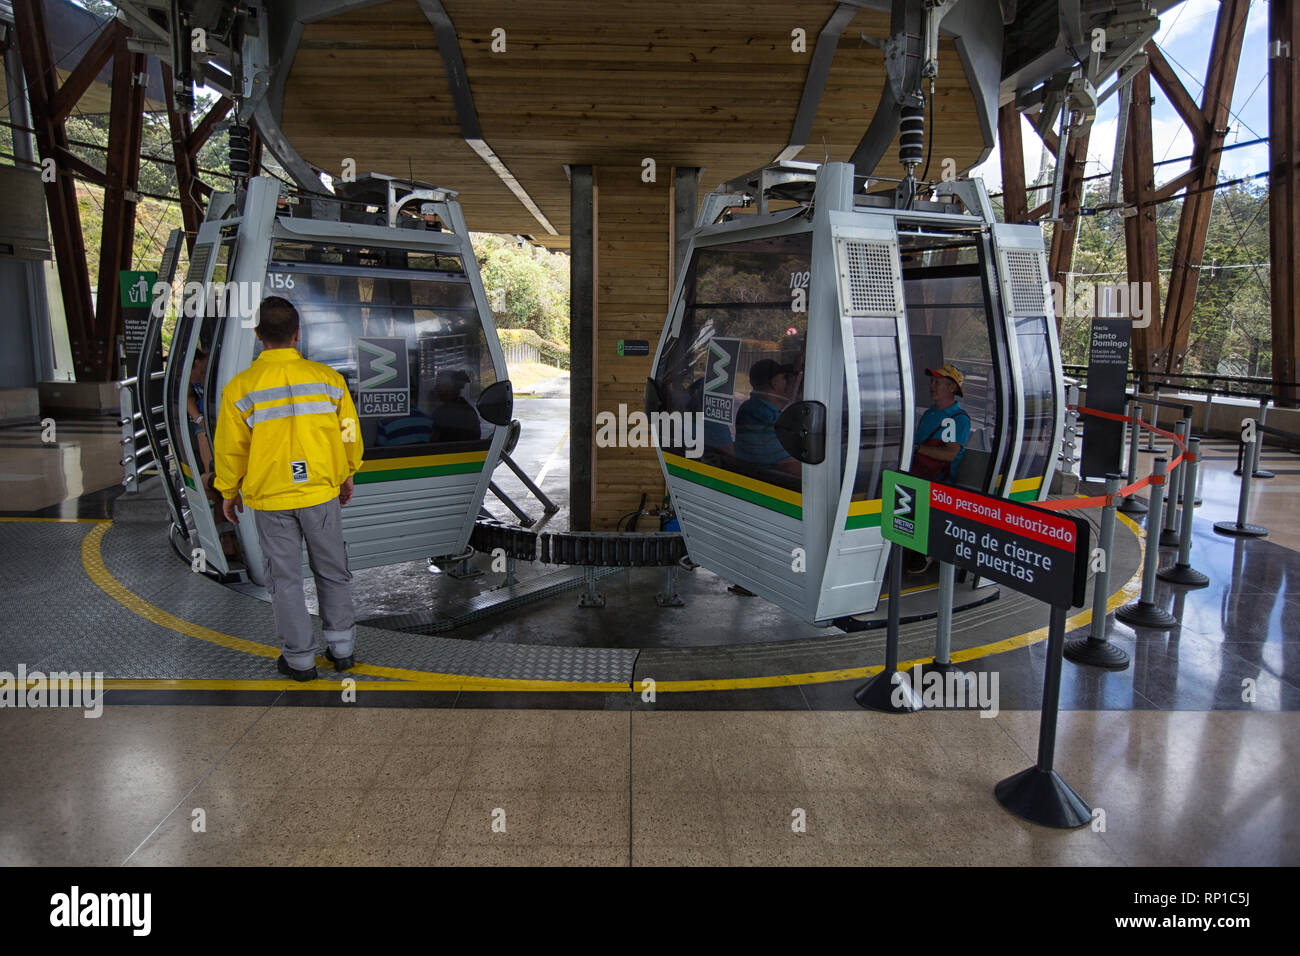 Medellin, Colombia - August 20, 2018: the loading zone of the Arvi Park gondola station Stock Photo